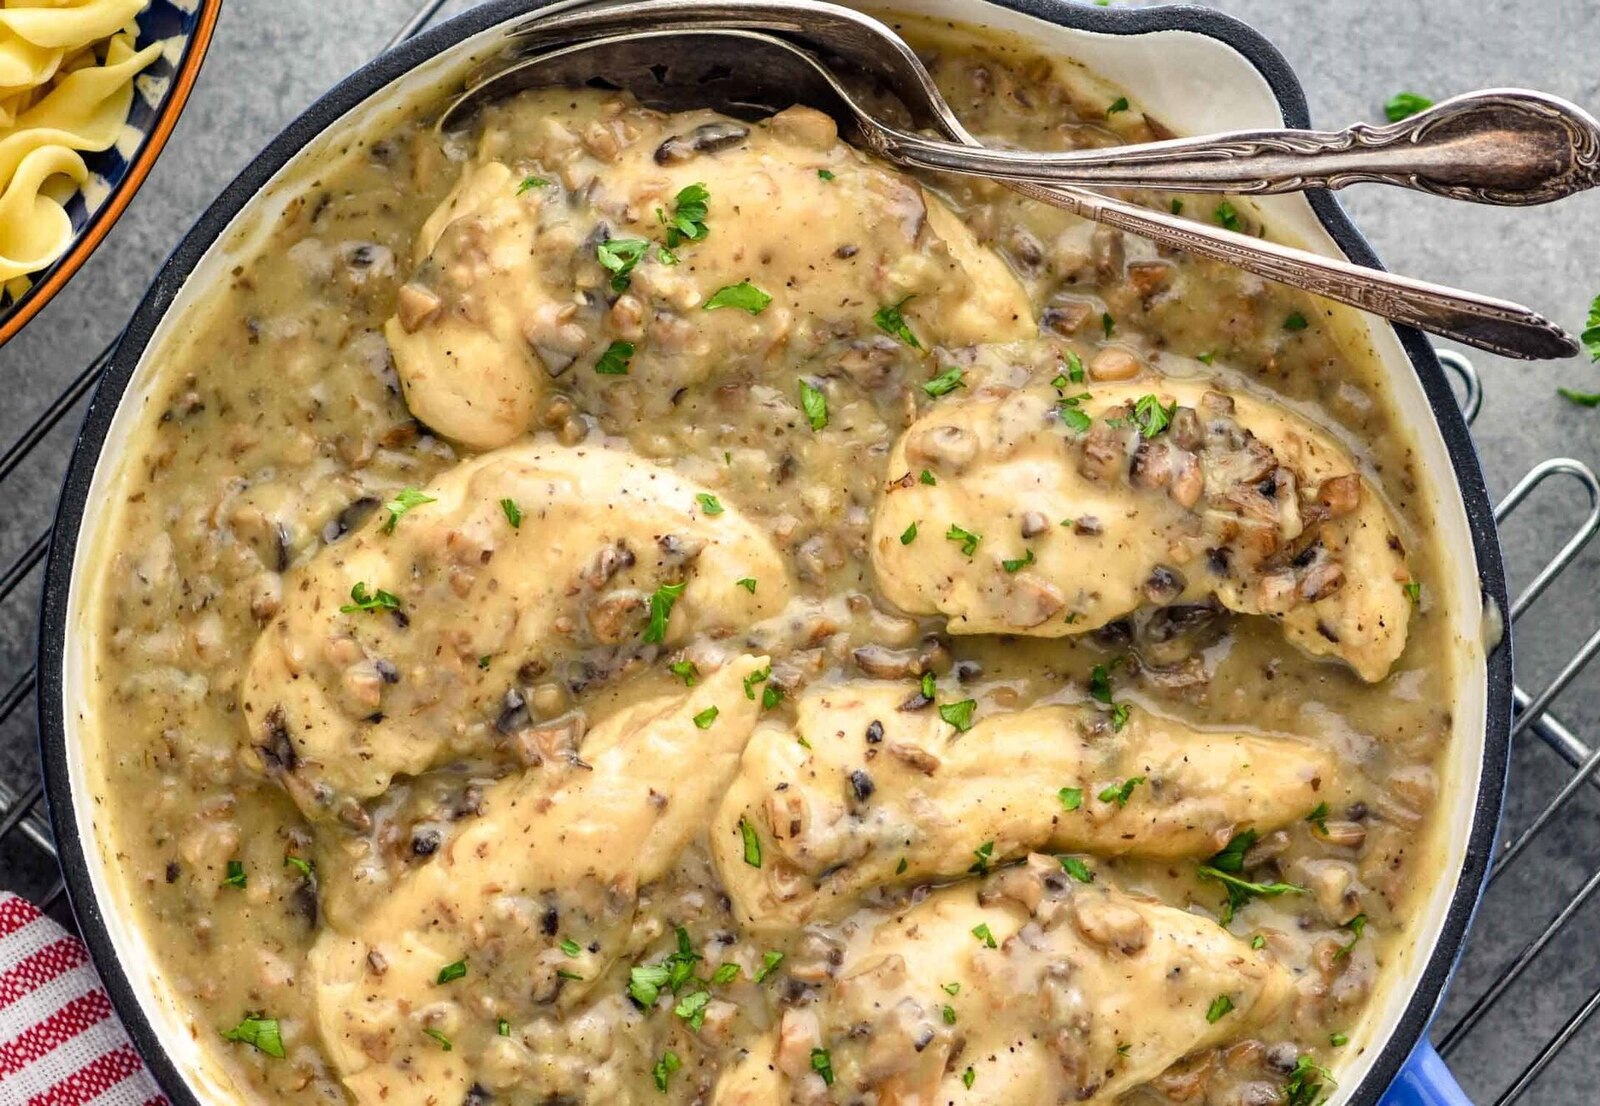 Can You Use Cream Of Chicken When Using An Electric Pressure Cooker